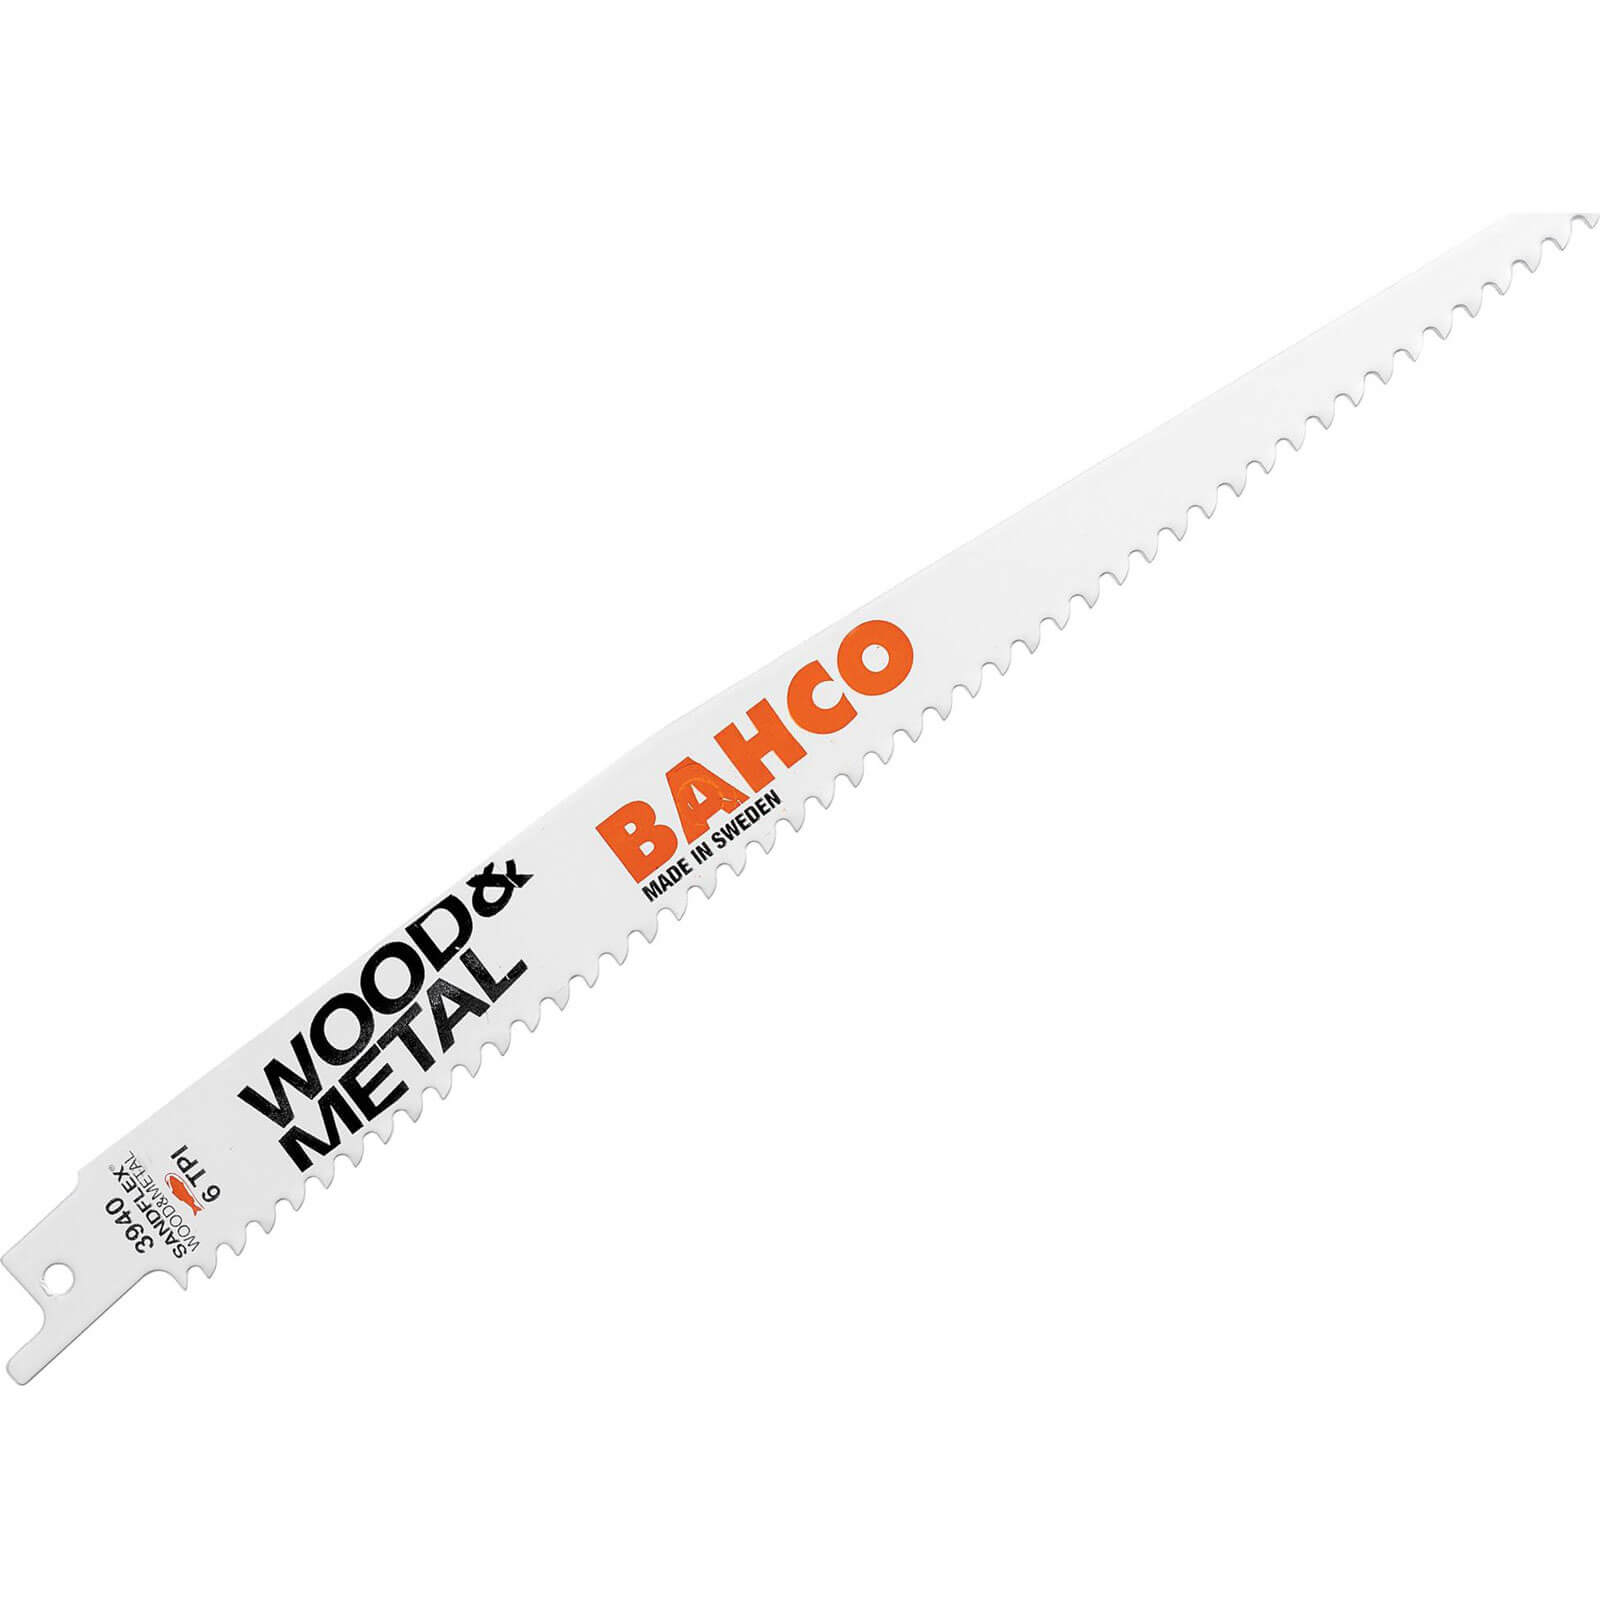 Image of Bahco Bi Metal Reciprocating Sabre Saw Blades for Wood and Metal 228mm Pack of 5